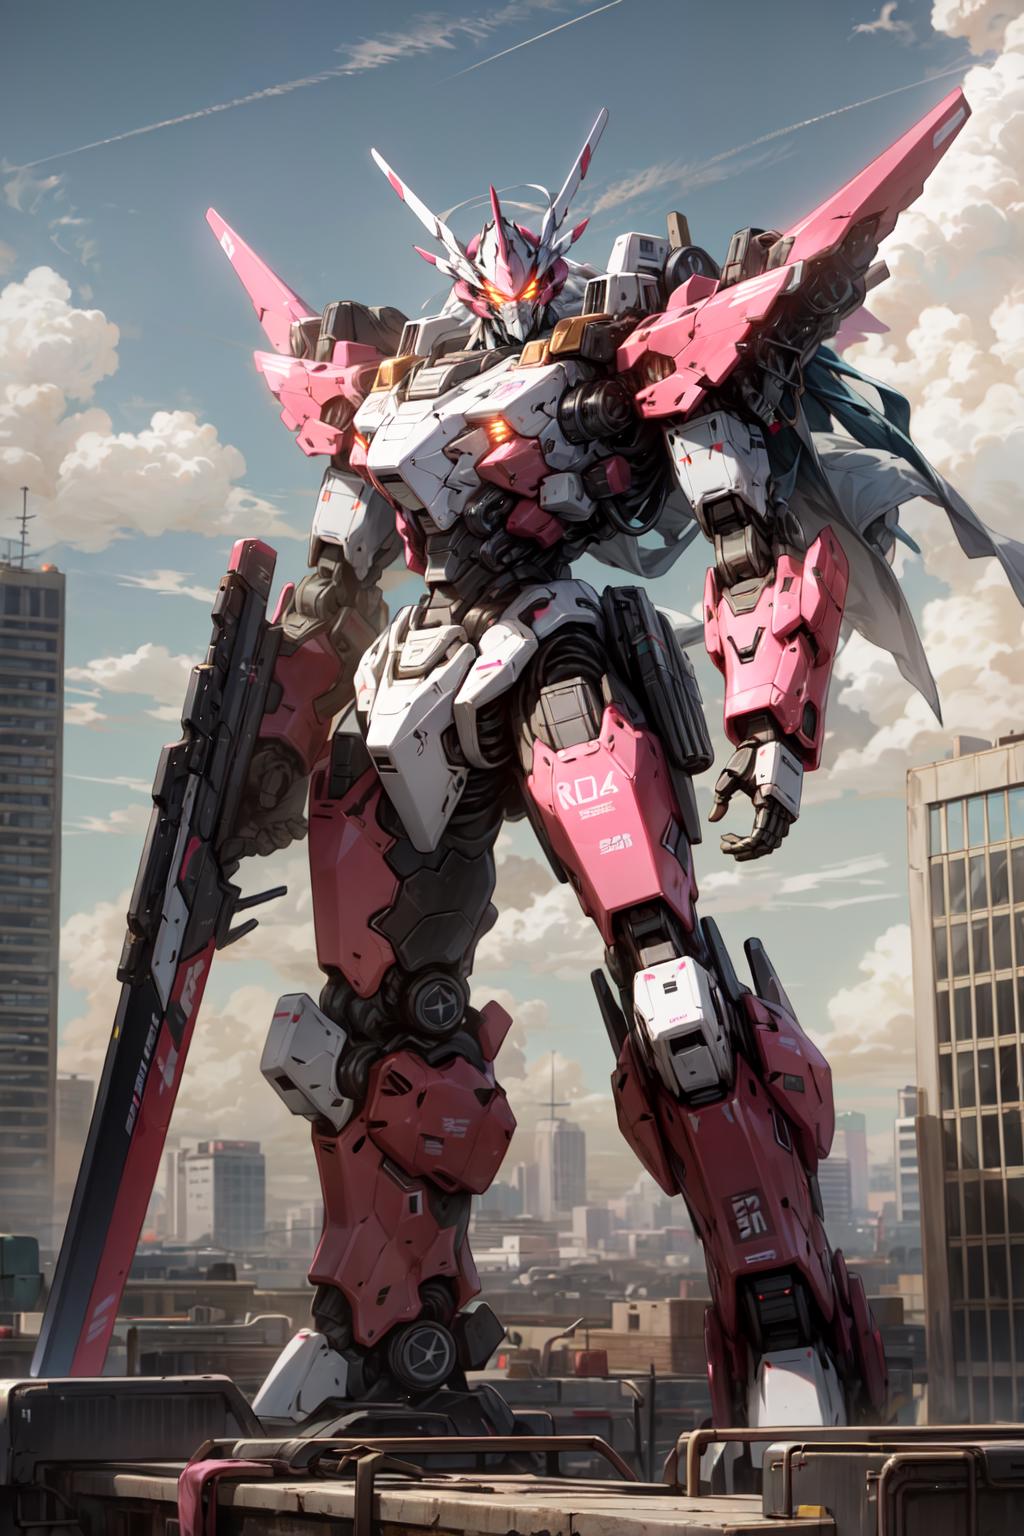 Pink and White Robotic Giant with Gun in a Cityscape.